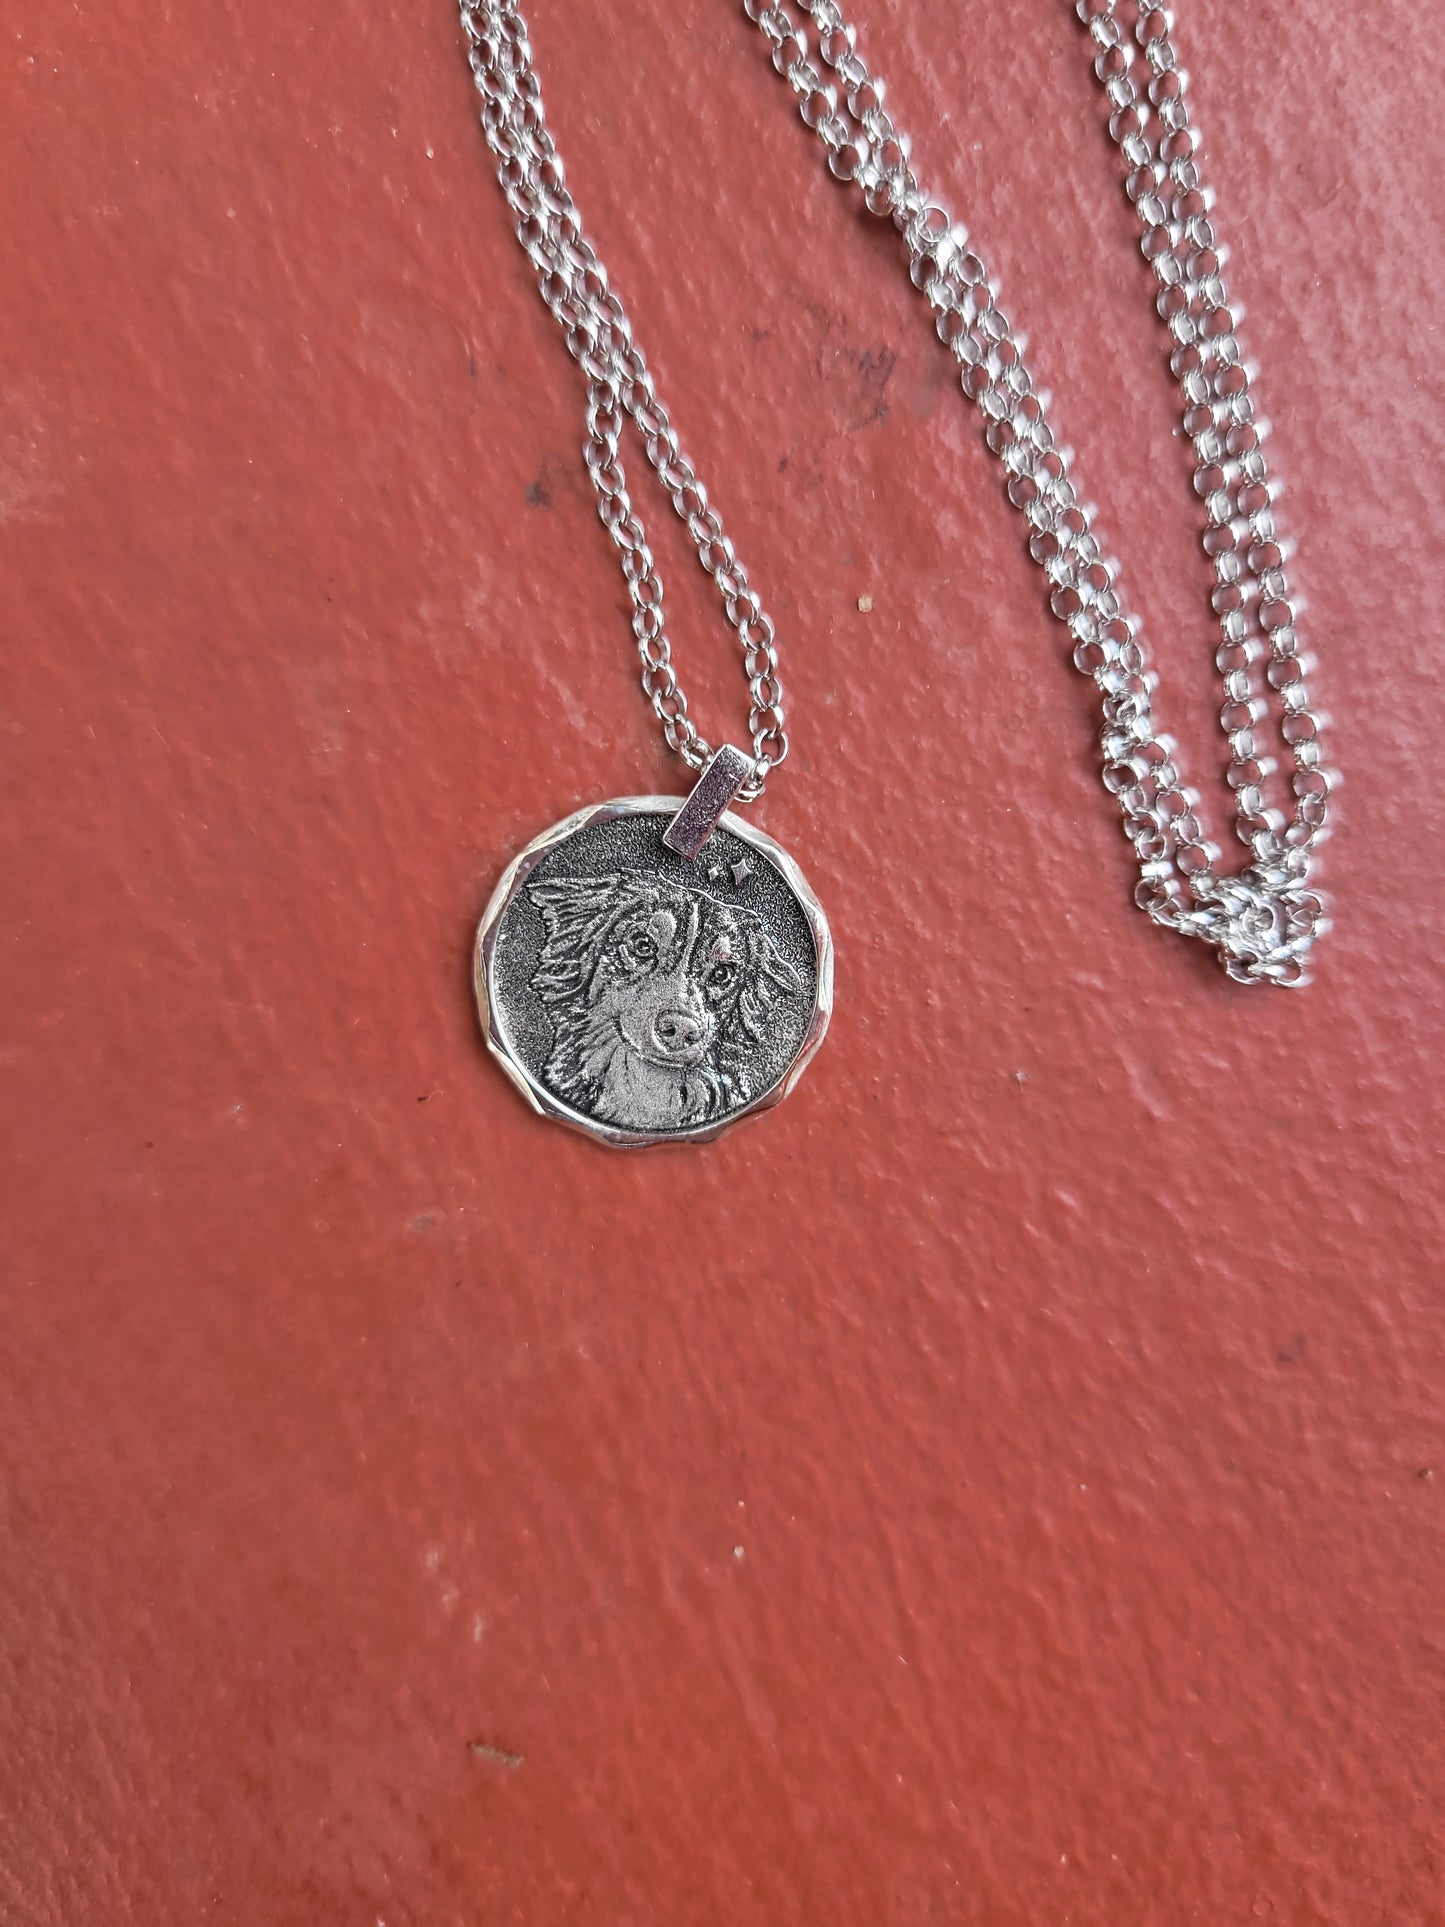 Fully customizable pet coin, personalized dog coin, memorabilia, custom sterling silver coin, custom necklace coin, custom birthday gift